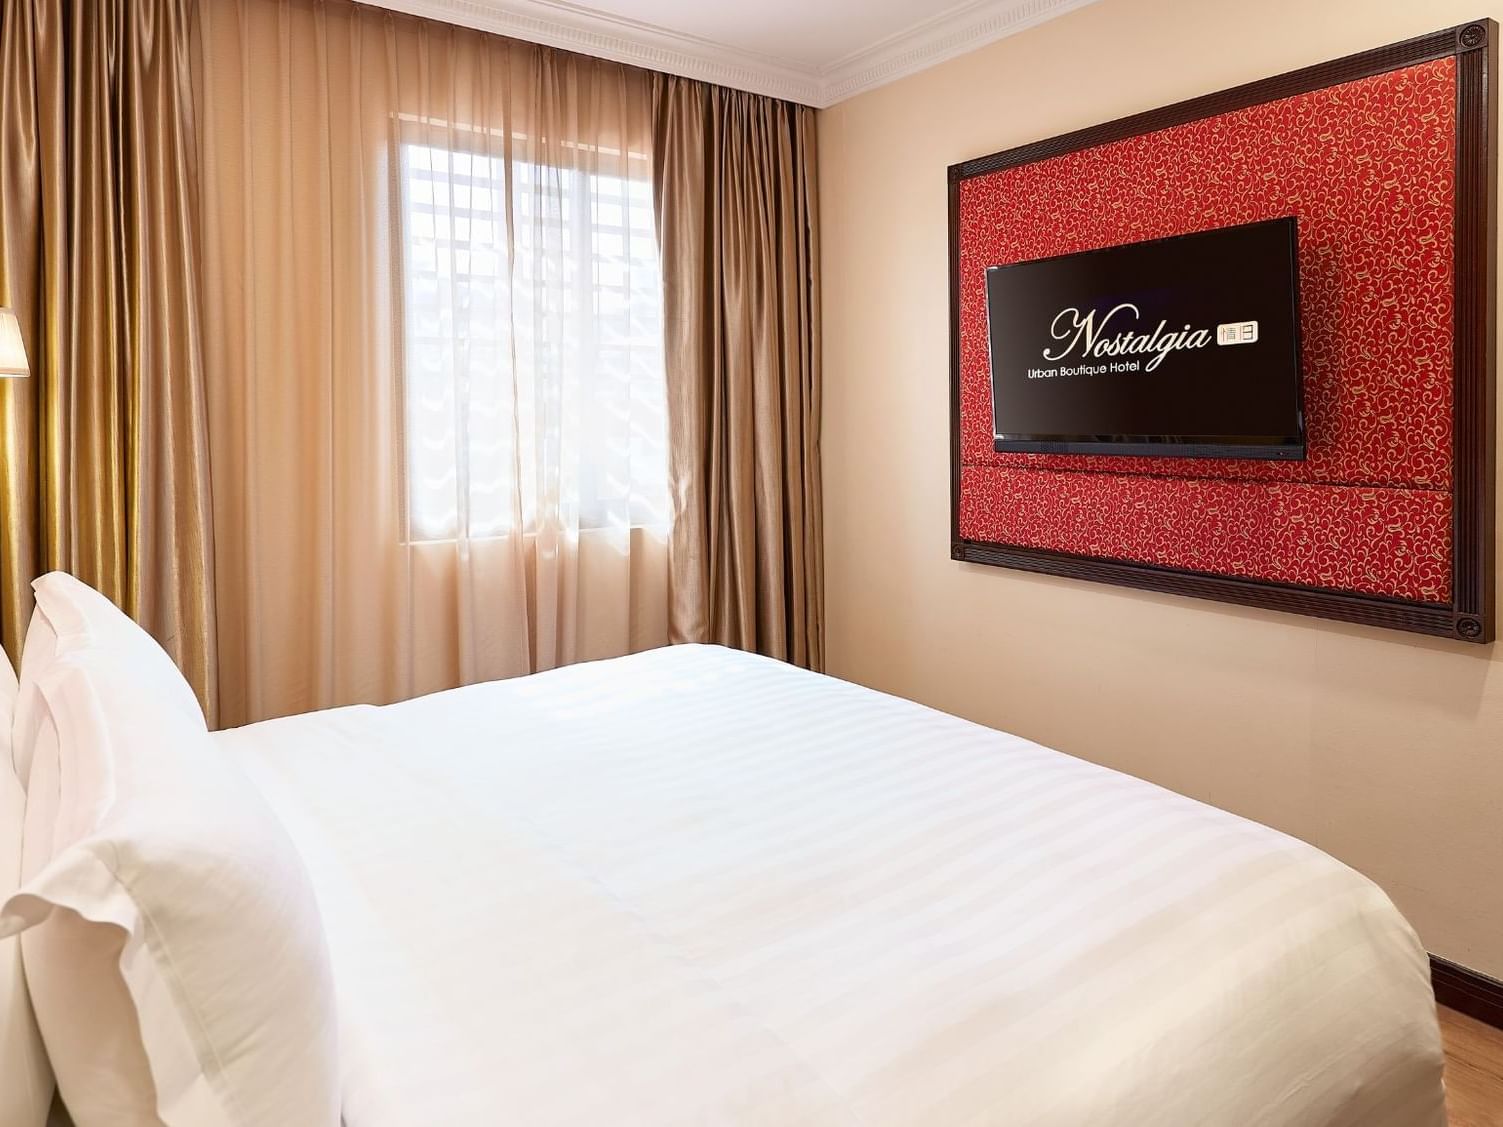 King-size bed with comfy pillows & TV Executive Room in Nostalgia Hotel Singapore